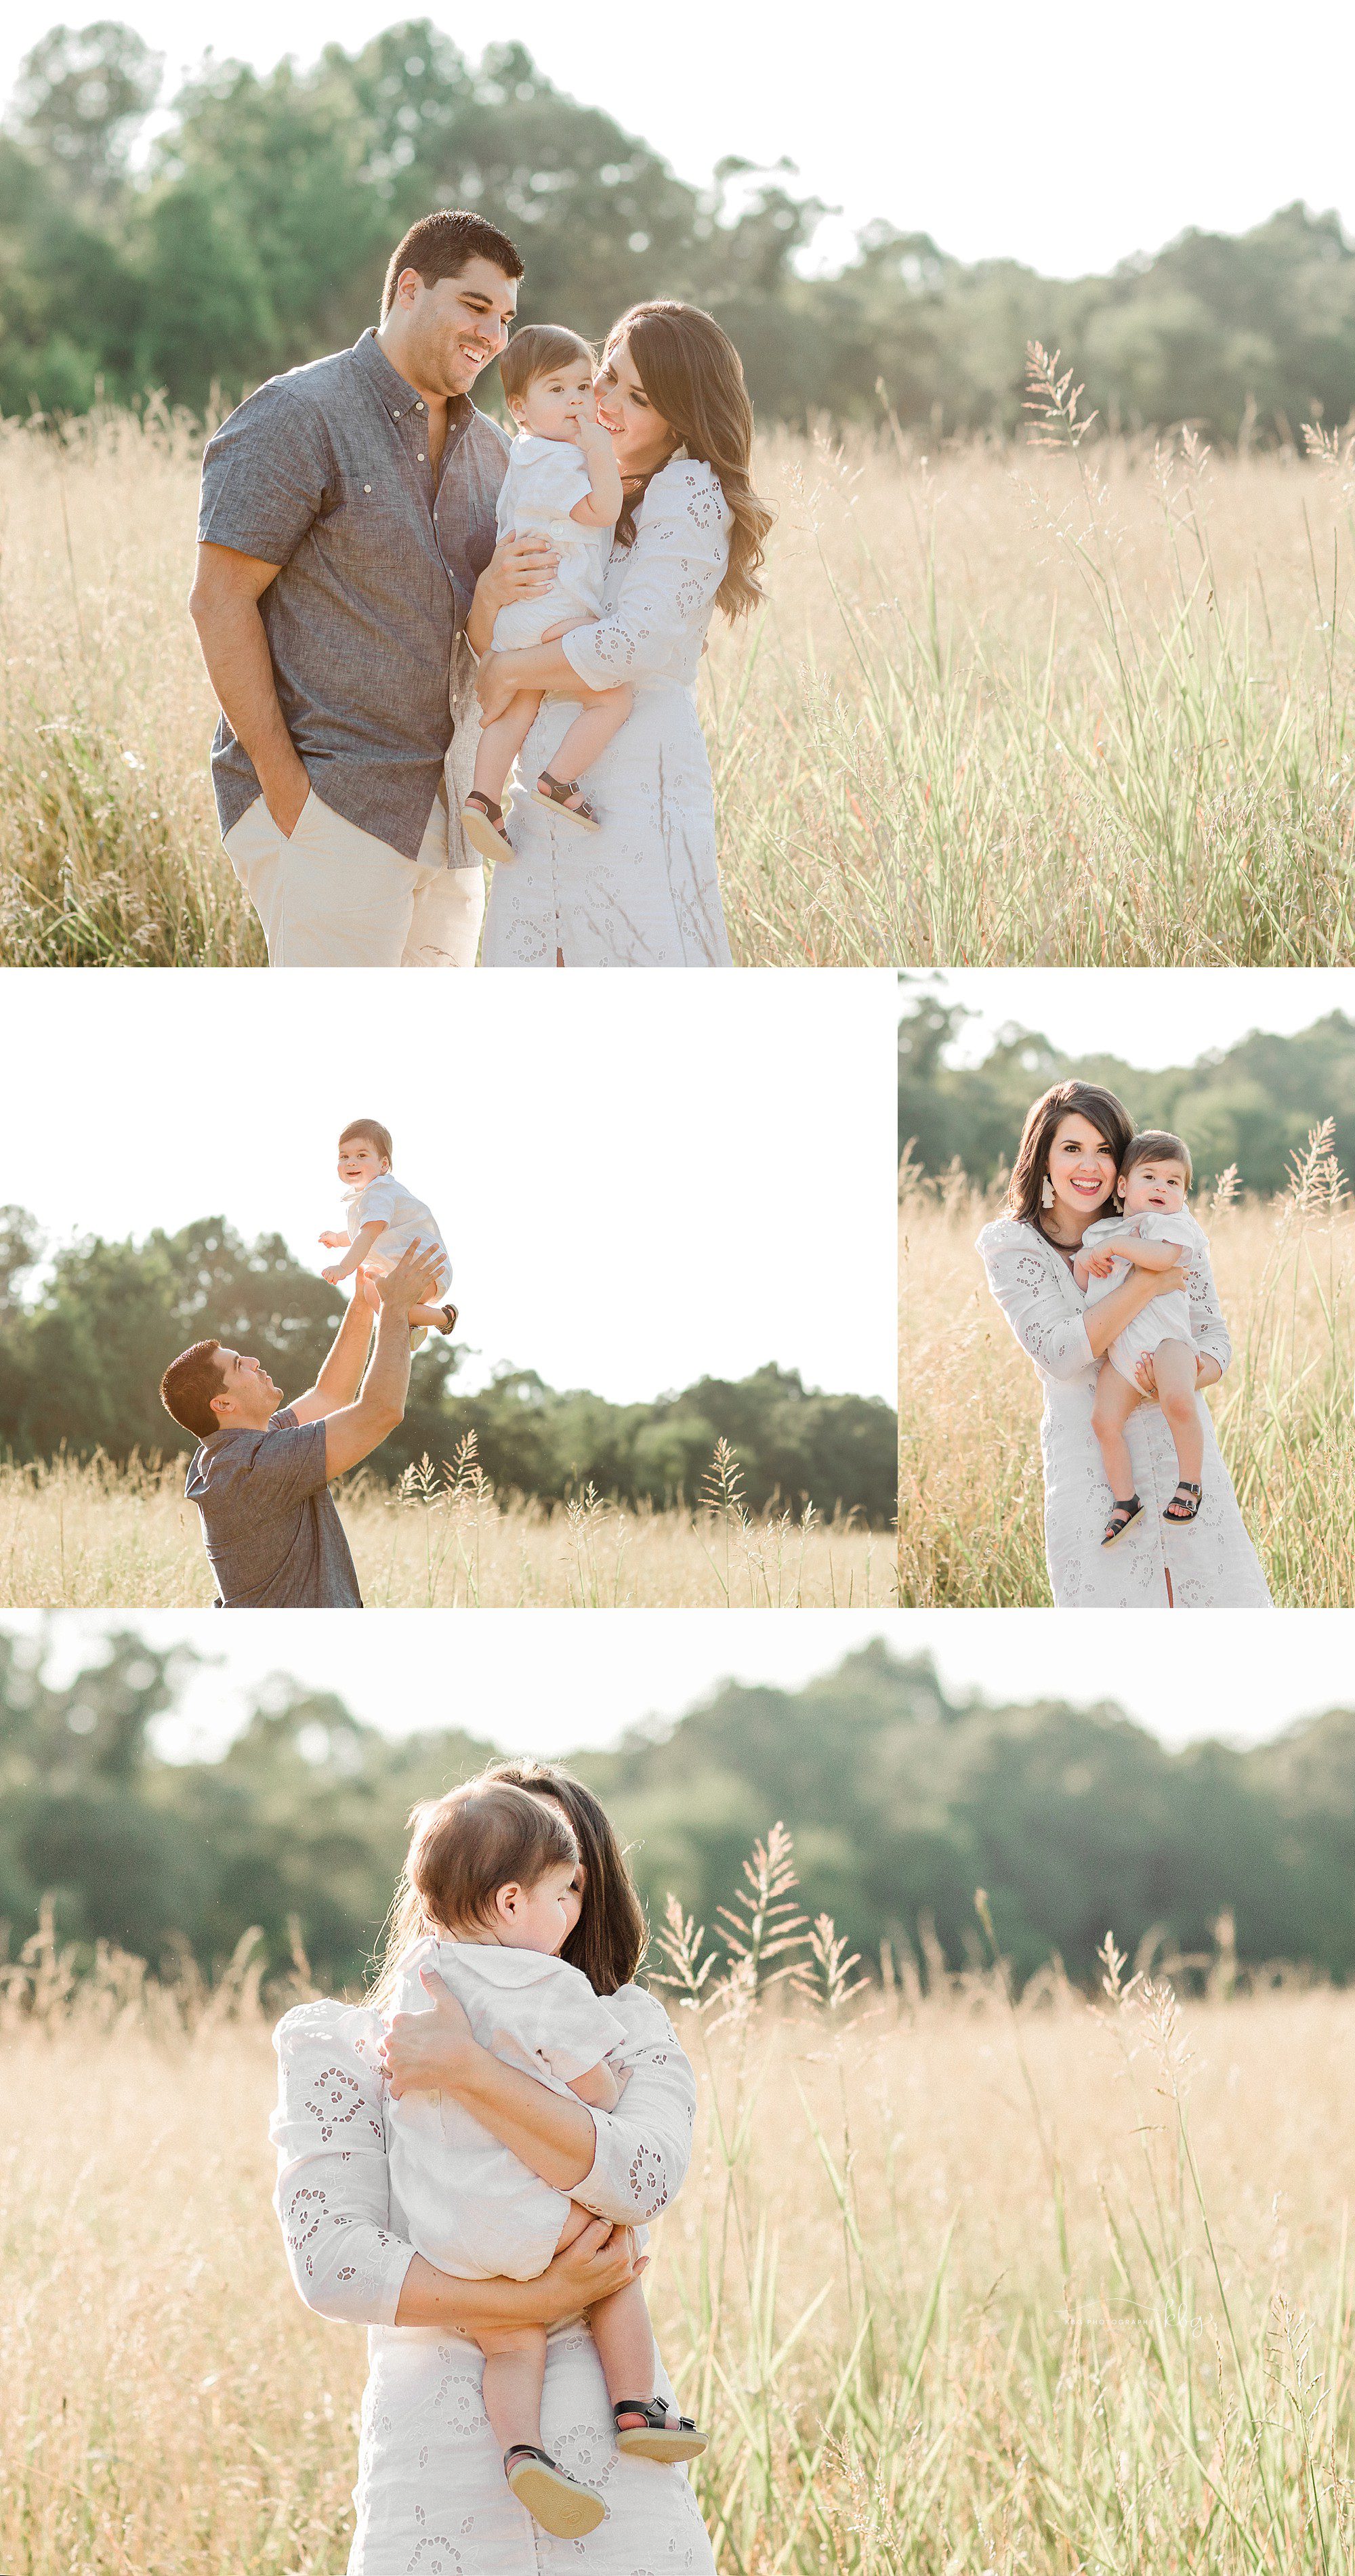 marietta family photographer - family of three smiling together outside